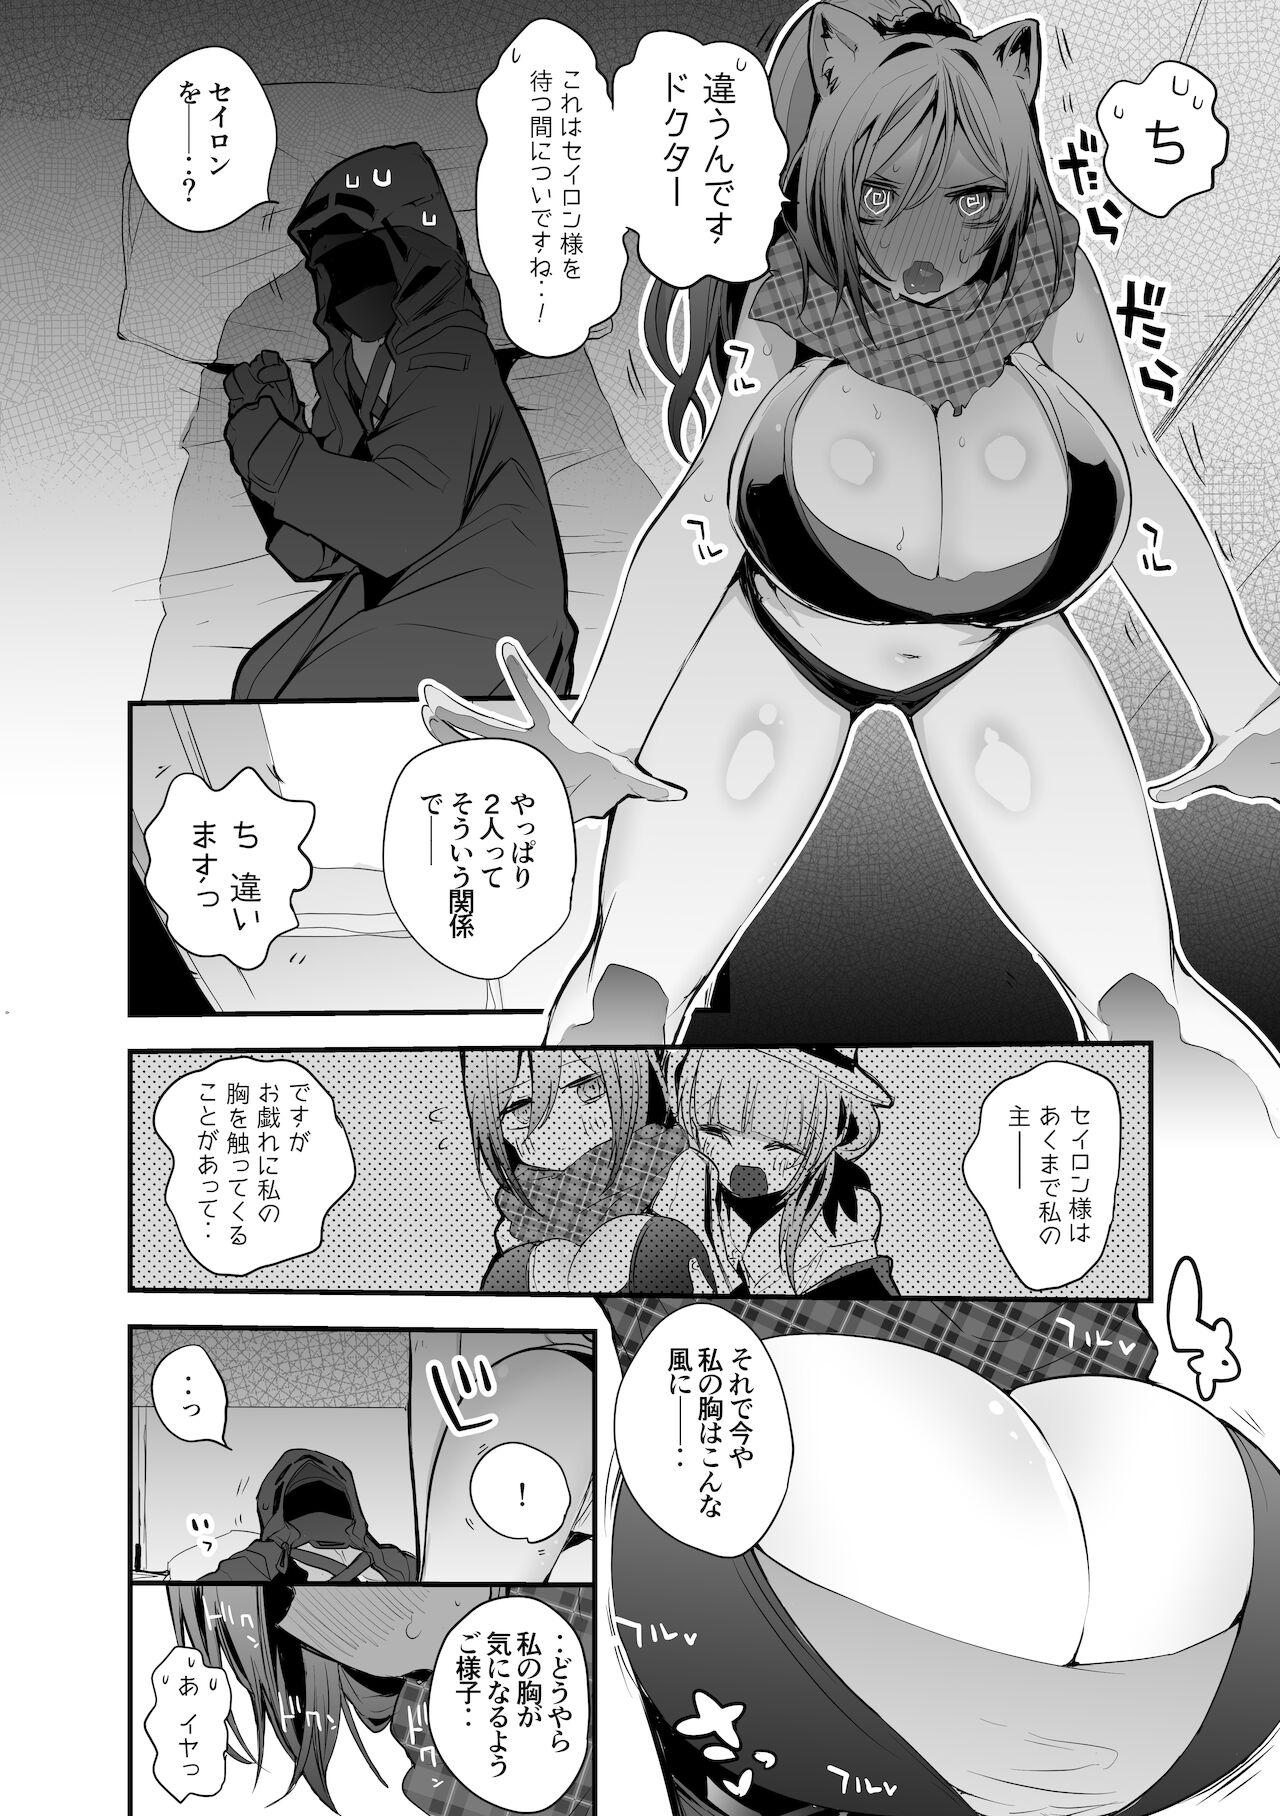 Hairy Sexy シュヴァルツは押し倒す編 - Arknights Pick Up - Page 3